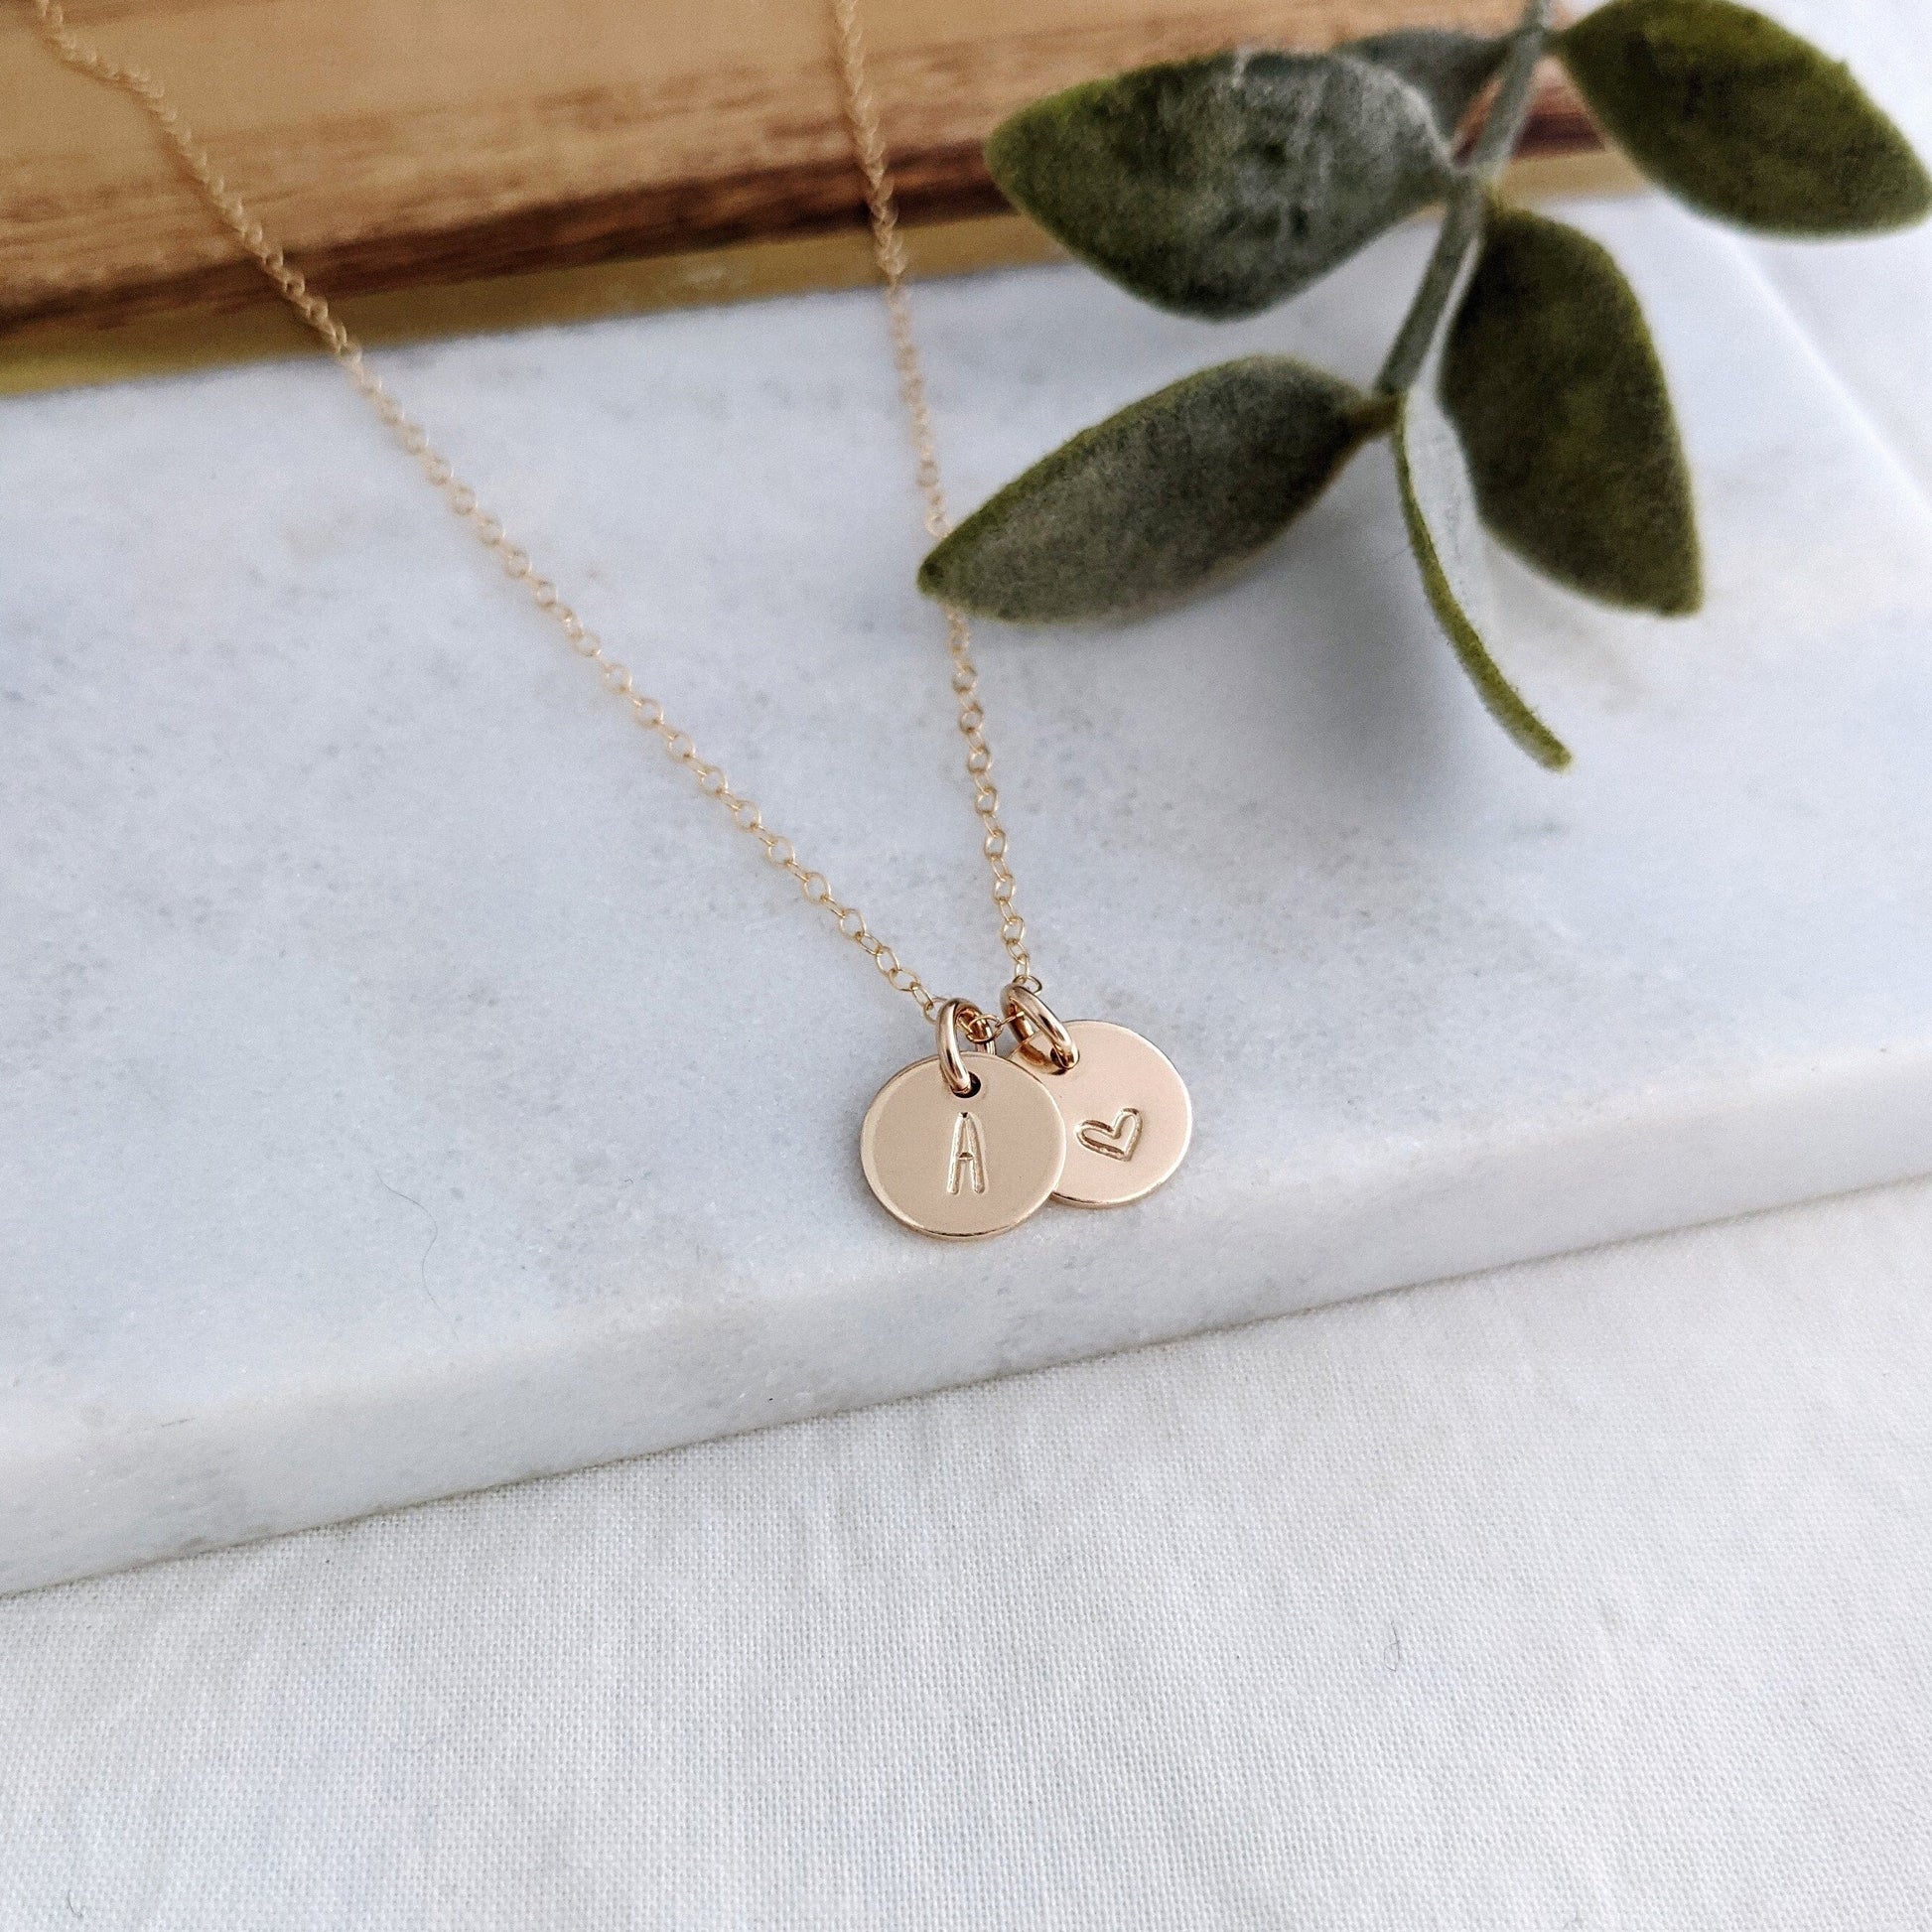 Personalized Initial Necklace- Hand-stamped initial- 1/2 inch pendant- –  Jenn's Handmade Jewelry